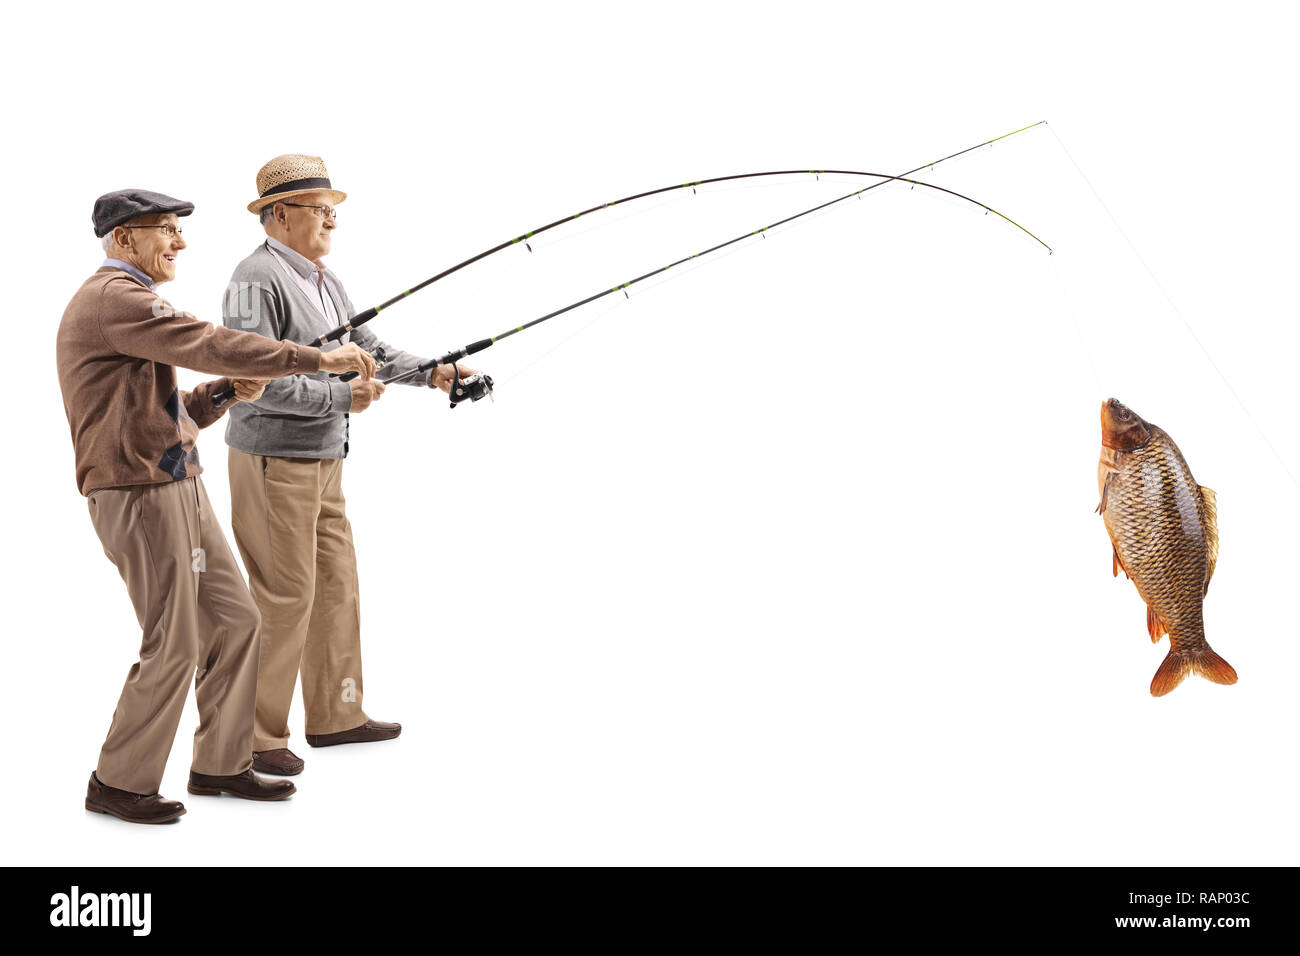 A fishing rod Cut Out Stock Images & Pictures - Page 3 - Alamy